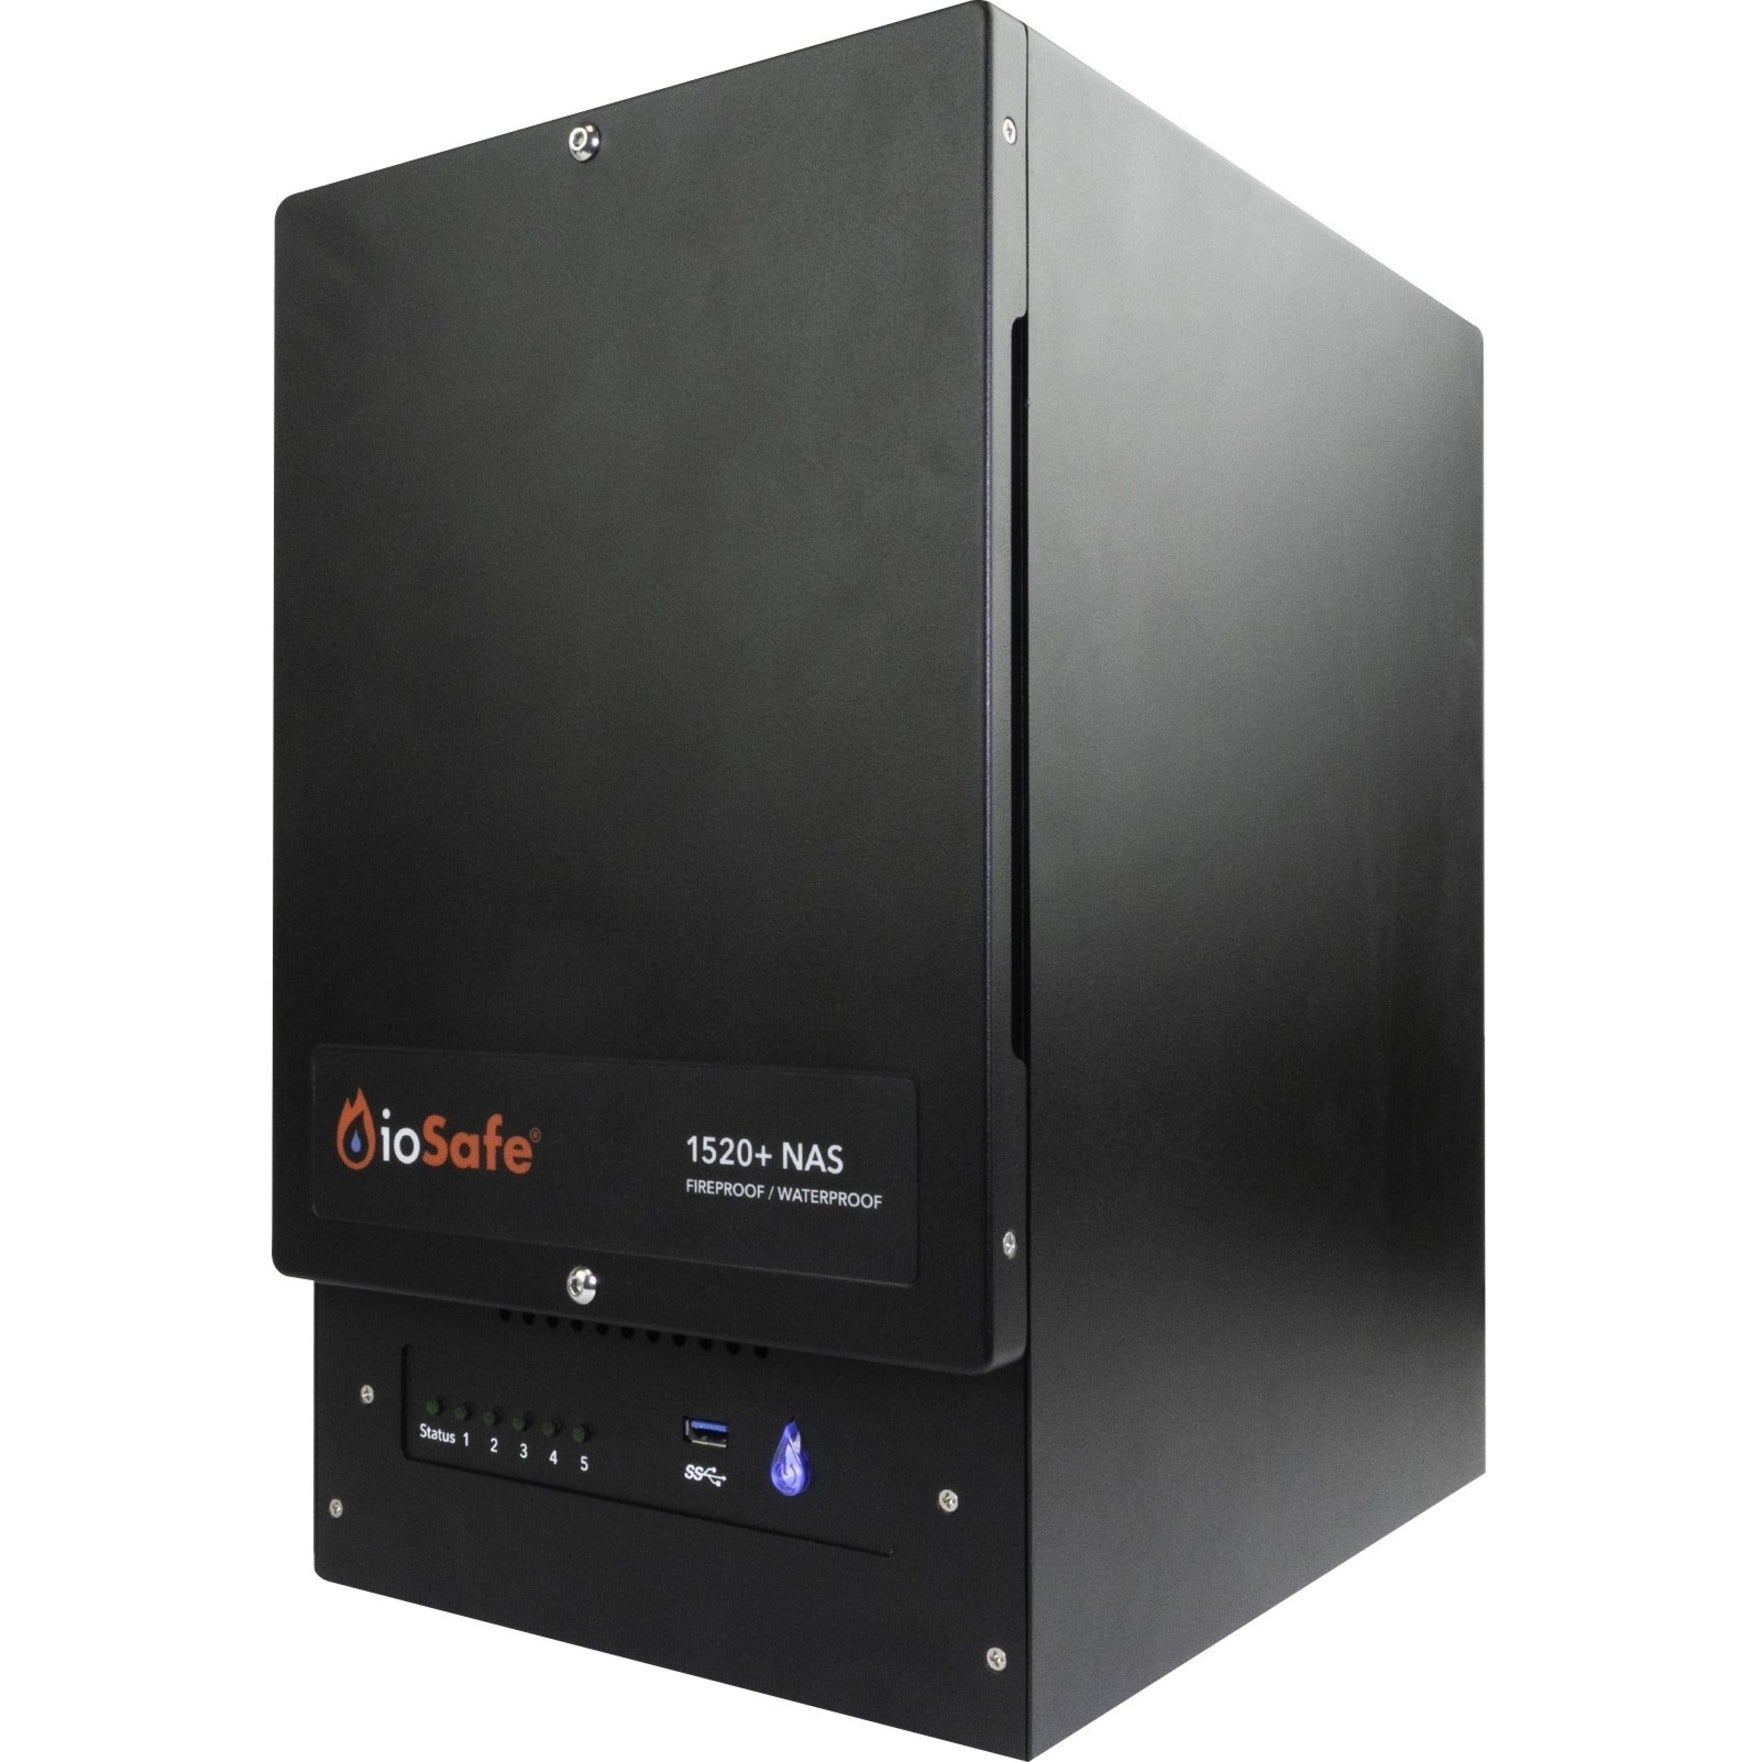 ioSafe 75300-3730-0200 1520+ NAS Storage System, Diskless, 70TB Capacity Supported